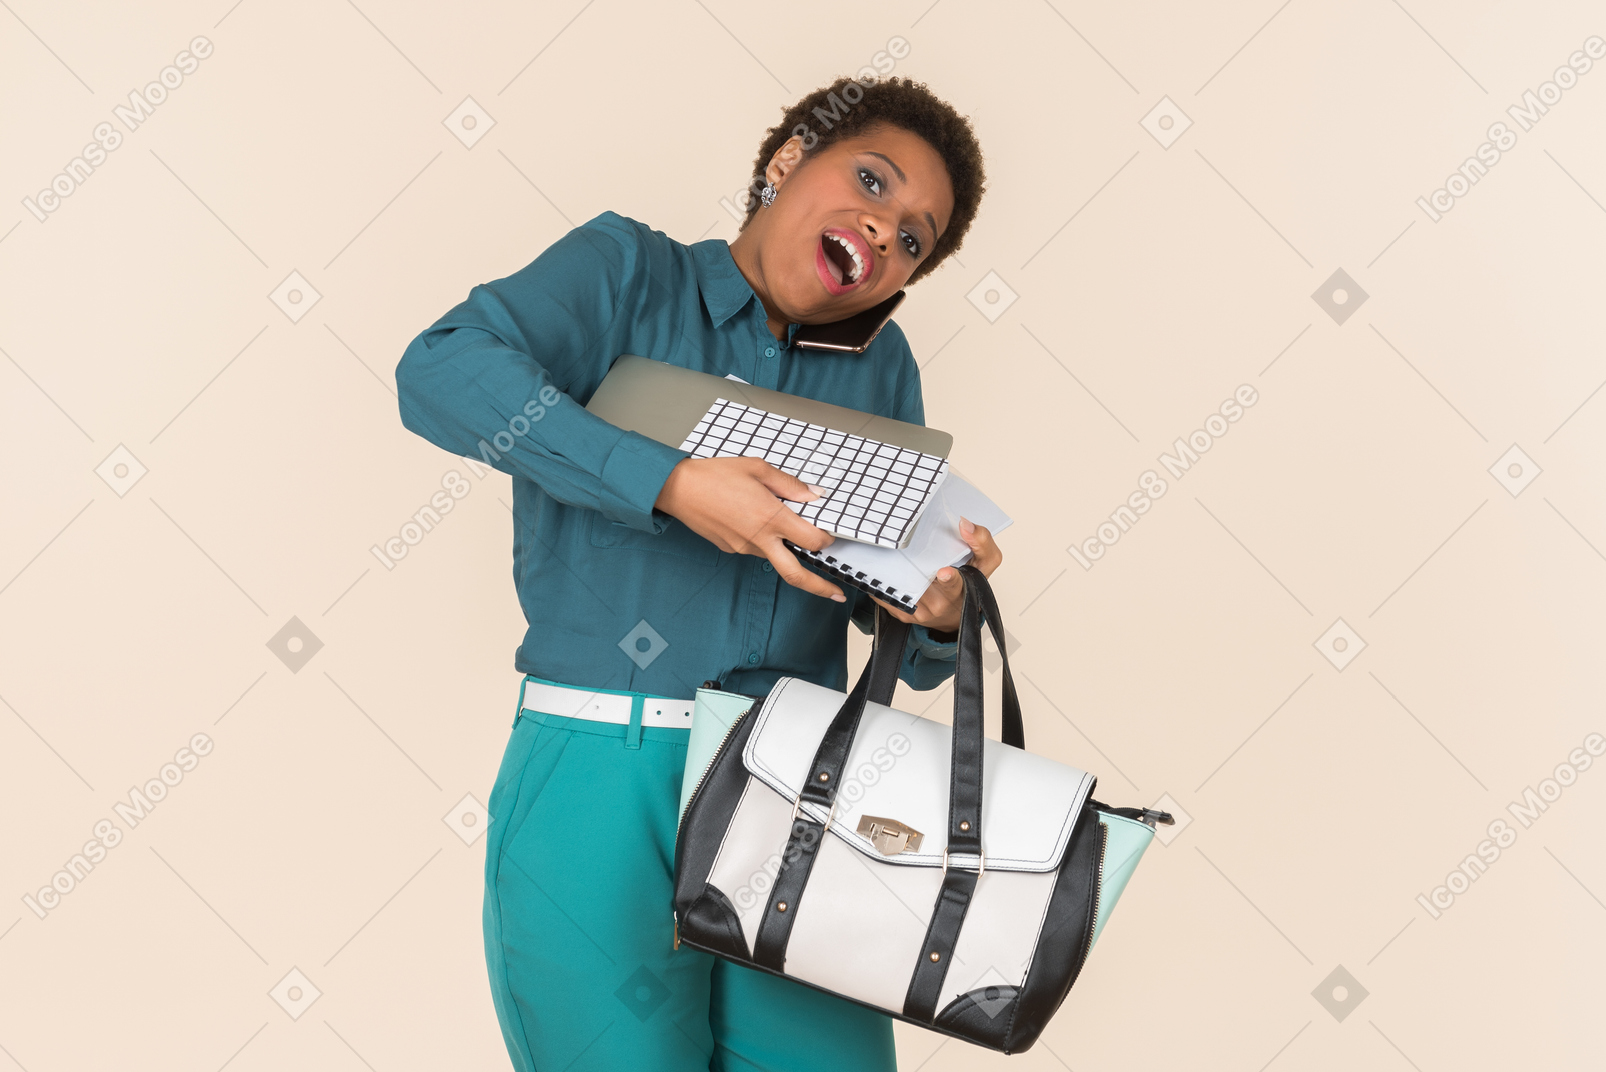 Holding bag and papers young woman looks like in a hurry